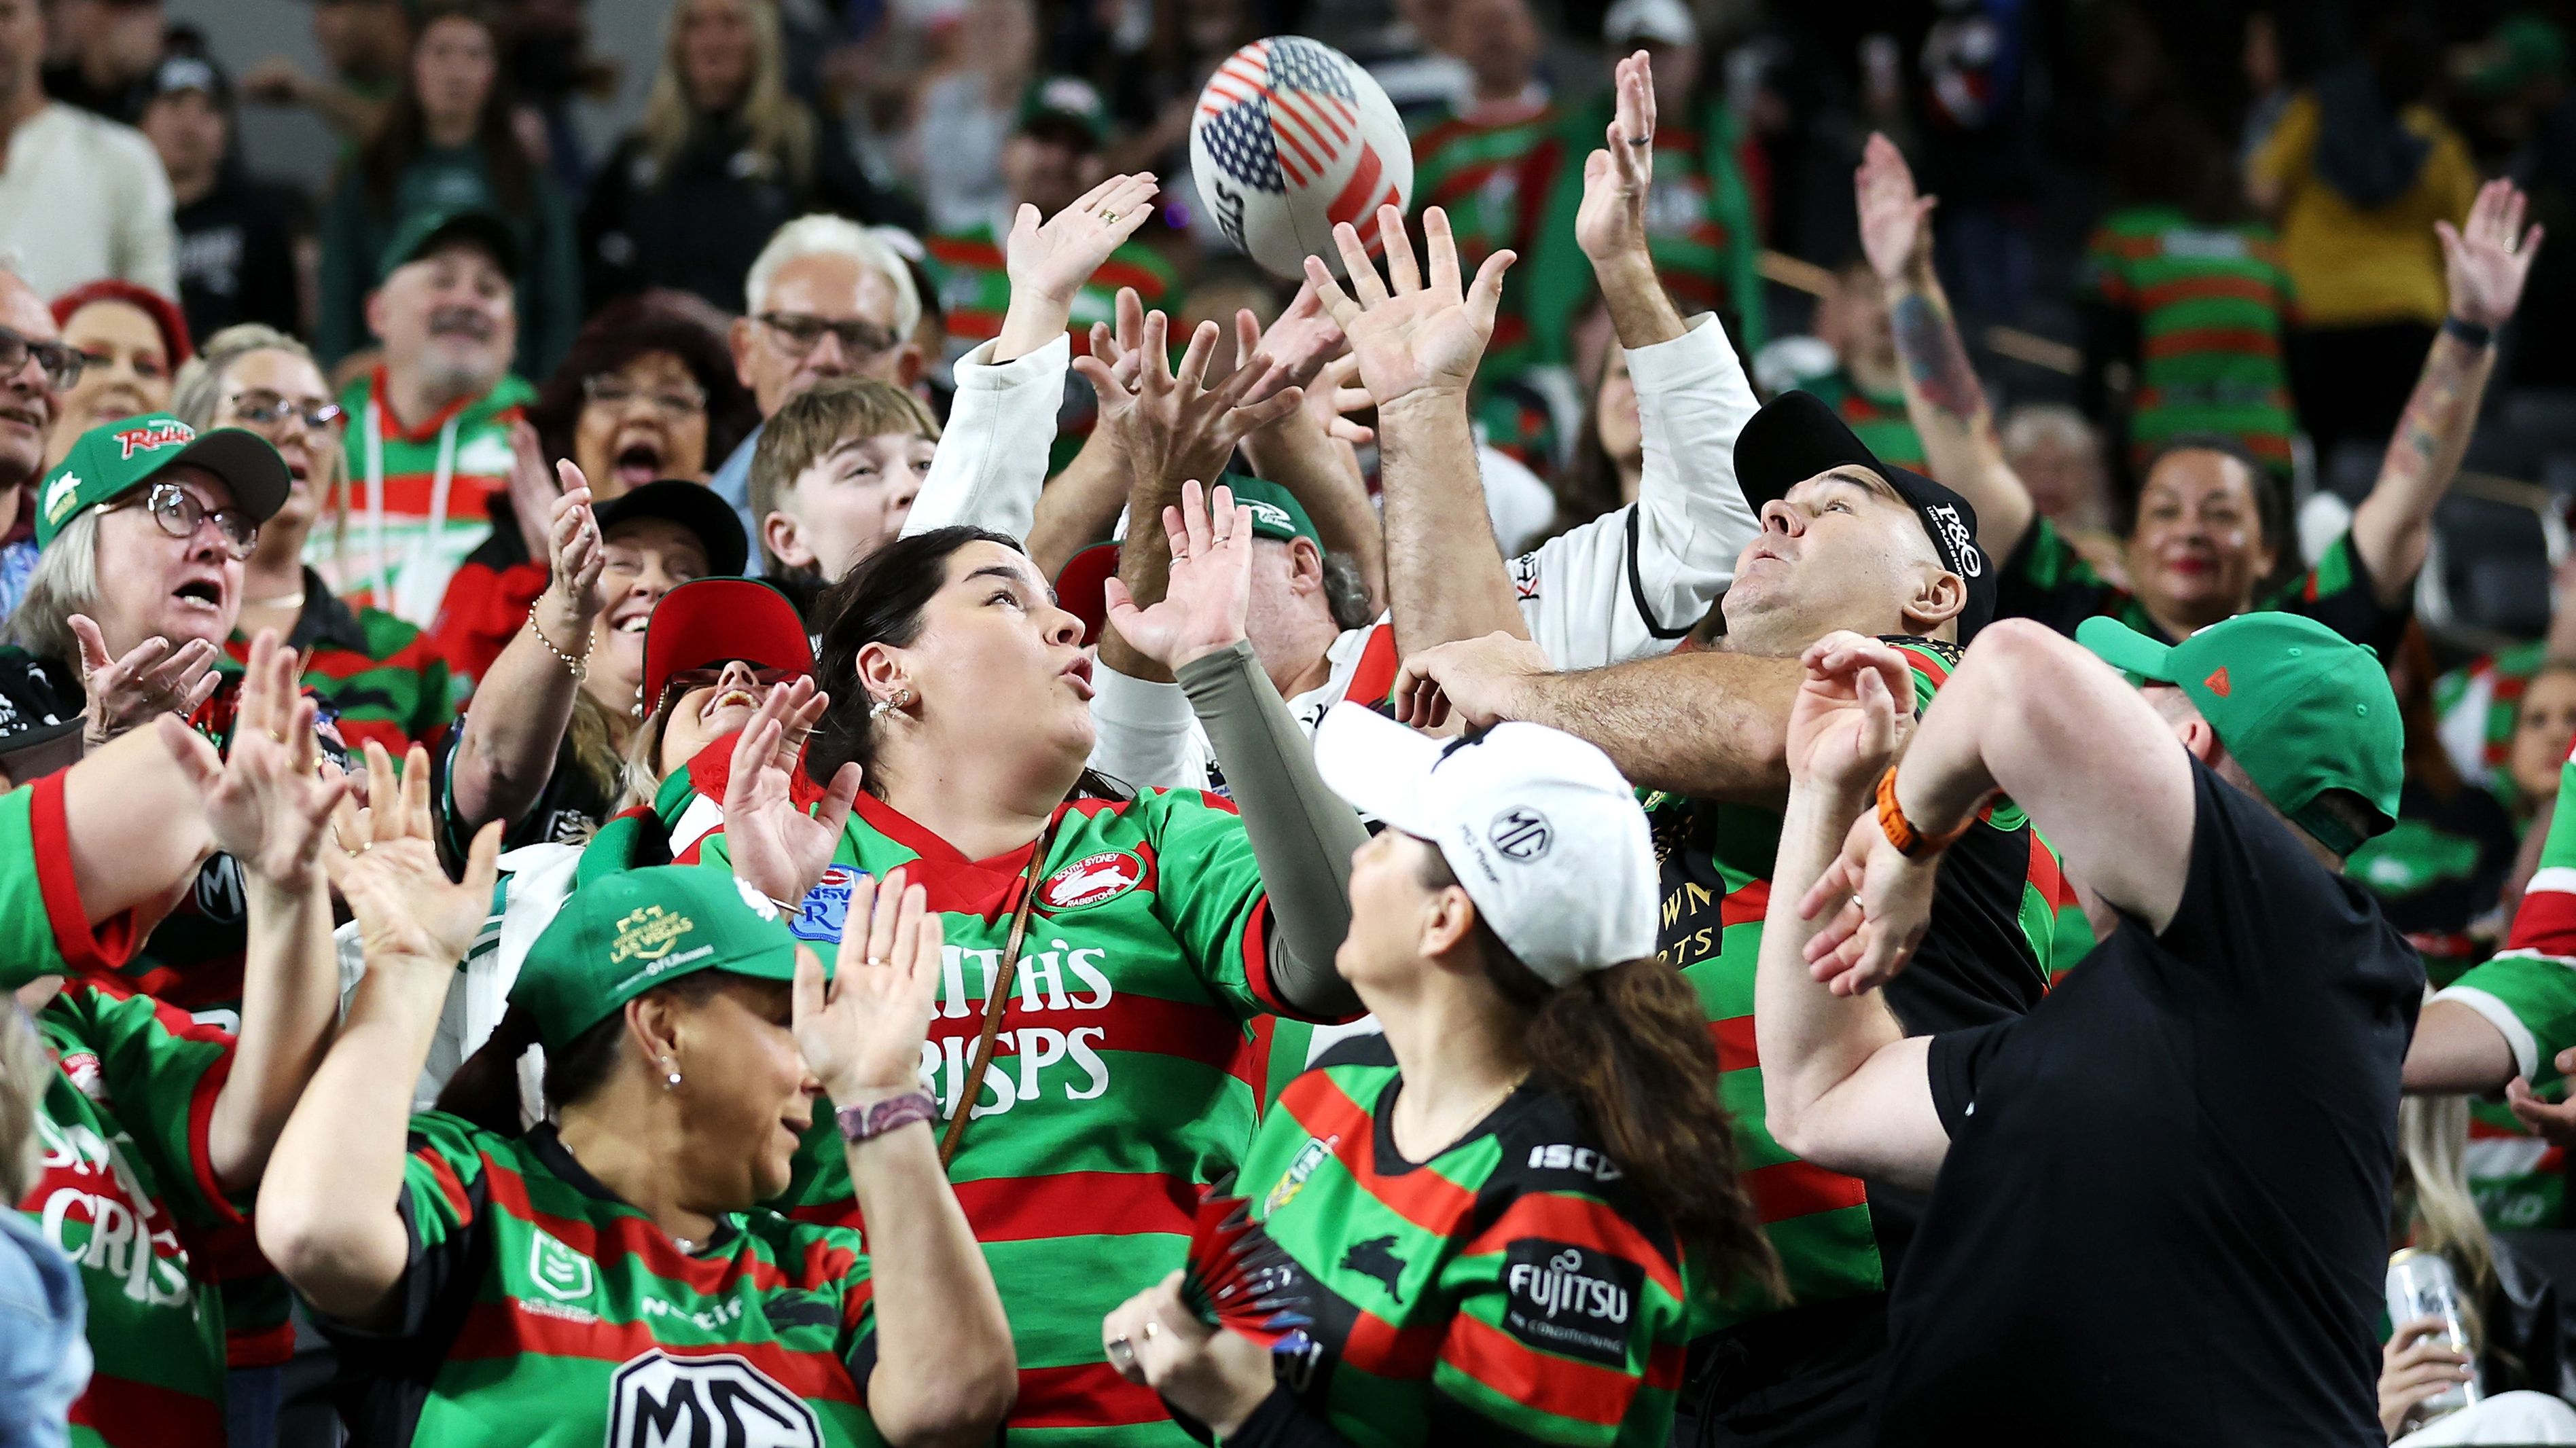 Supporters attempt to catch a football in the crowd before the round one NRL match between Manly Sea Eagles and South Sydney Rabbitohs at Allegiant Stadium.